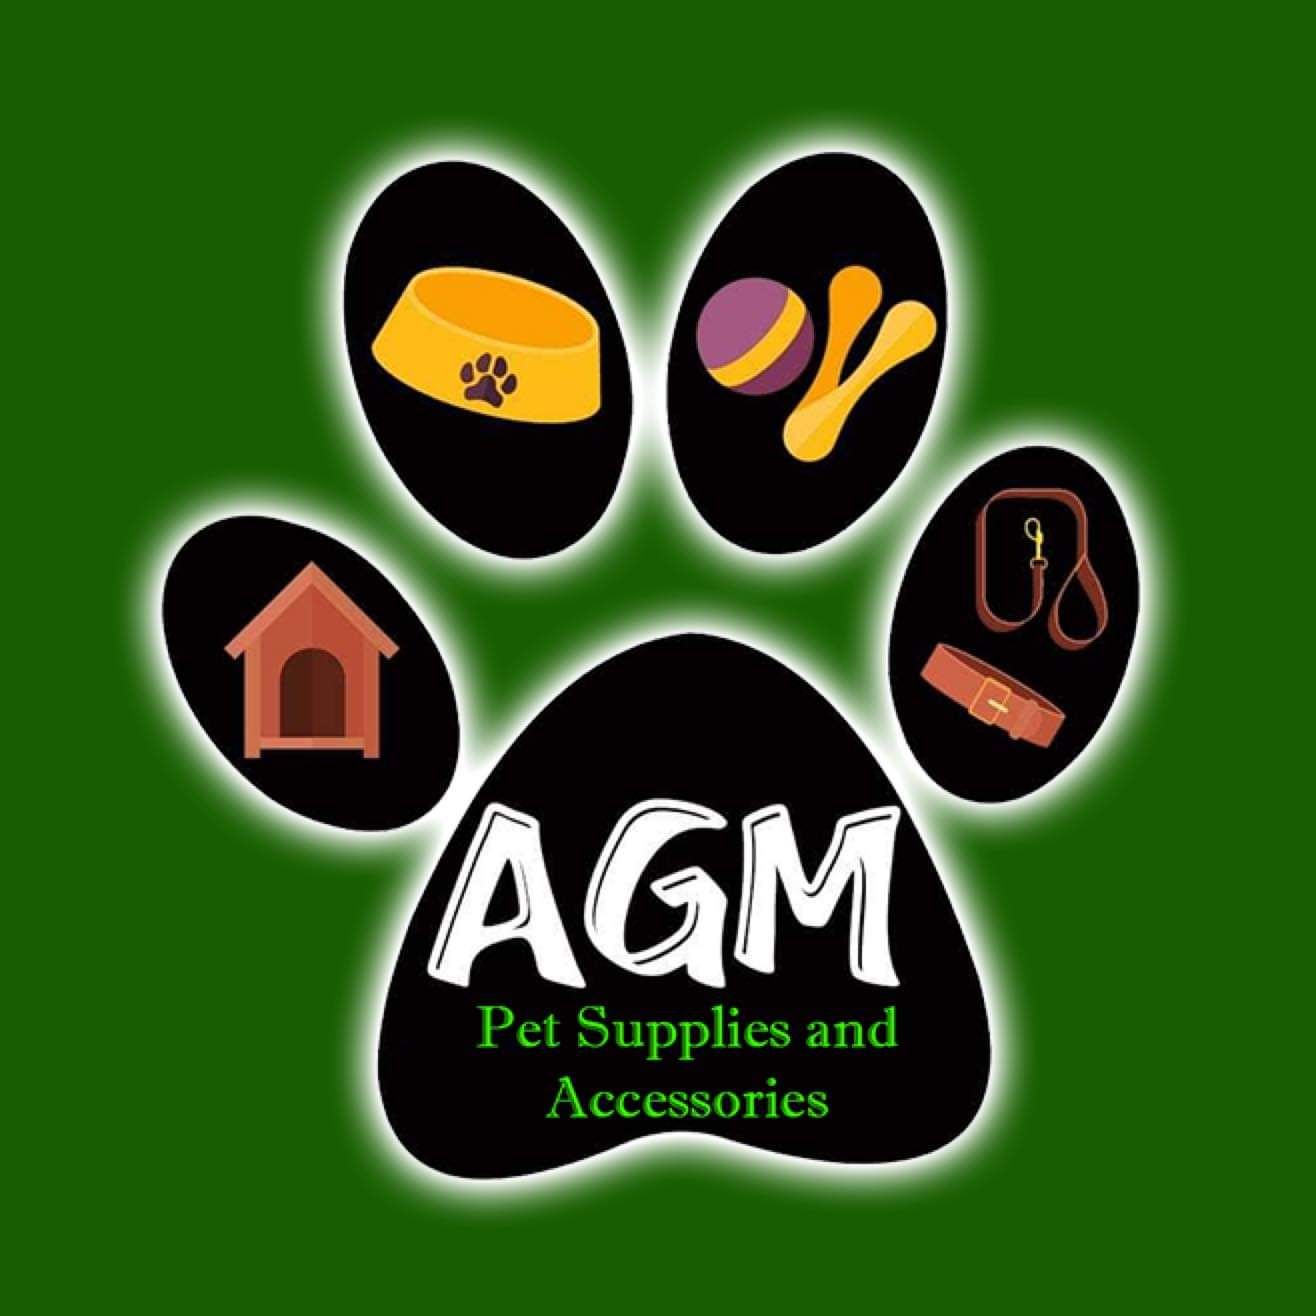 shop-online-with-agm-pet-supplies-and-accessories-now-visit-agm-pet